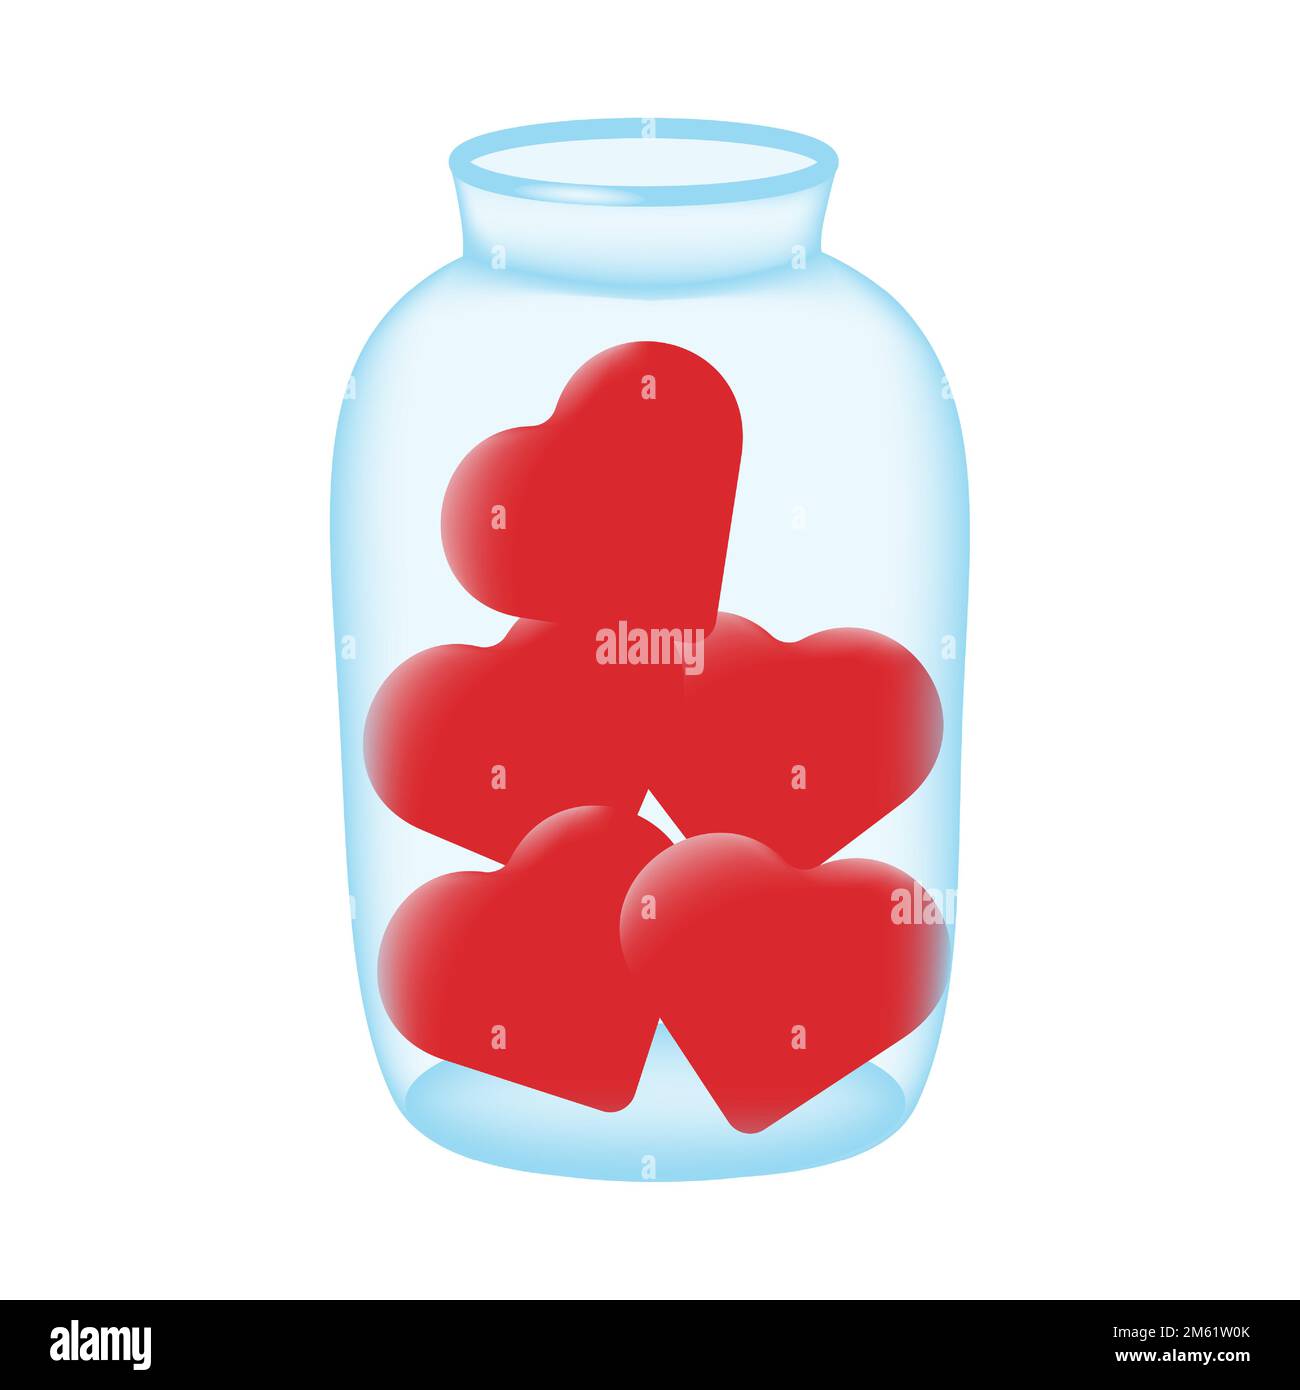 https://c8.alamy.com/comp/2M61W0K/glass-jar-filled-with-red-hearts-isolated-on-white-background-vector-illustration-2M61W0K.jpg